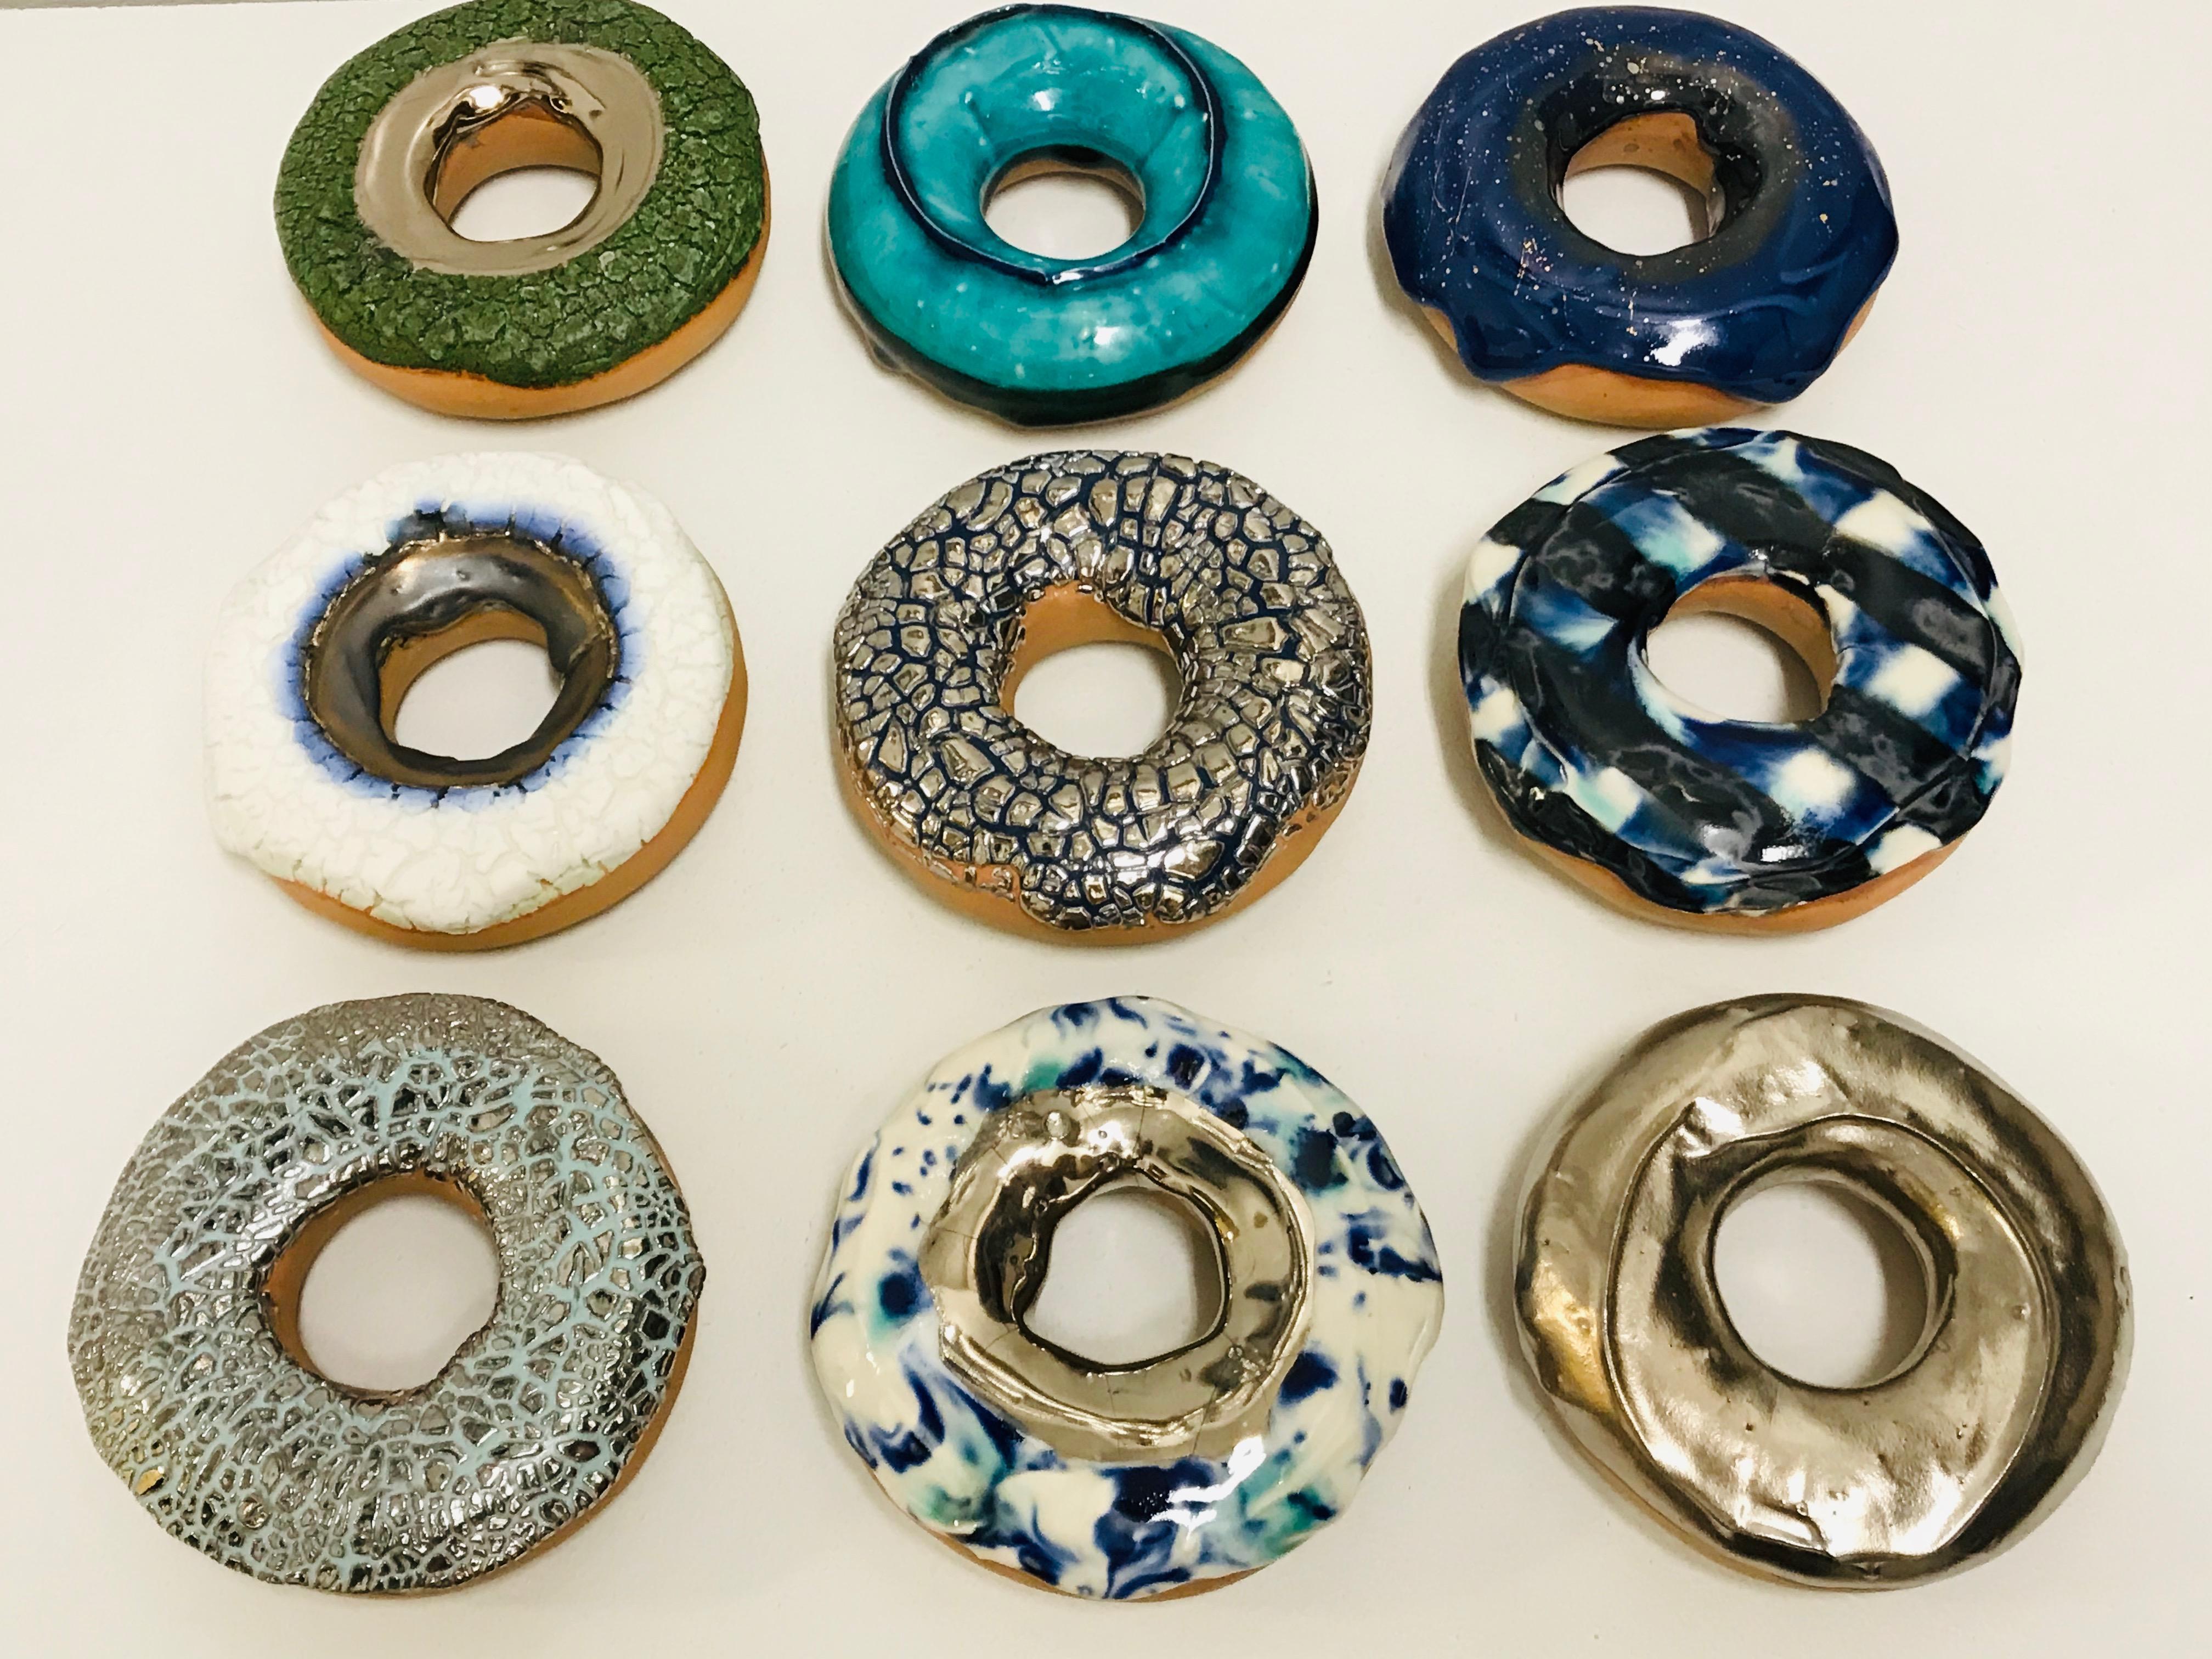 Unique, Hand Made, Porcelain and glaze.
Wall installation possible.
Stepanka Summer is a porcelain artist who blends art, design, and personal imageries from her childhood, inviting the viewer to take a deeper look at familiar encounters as she